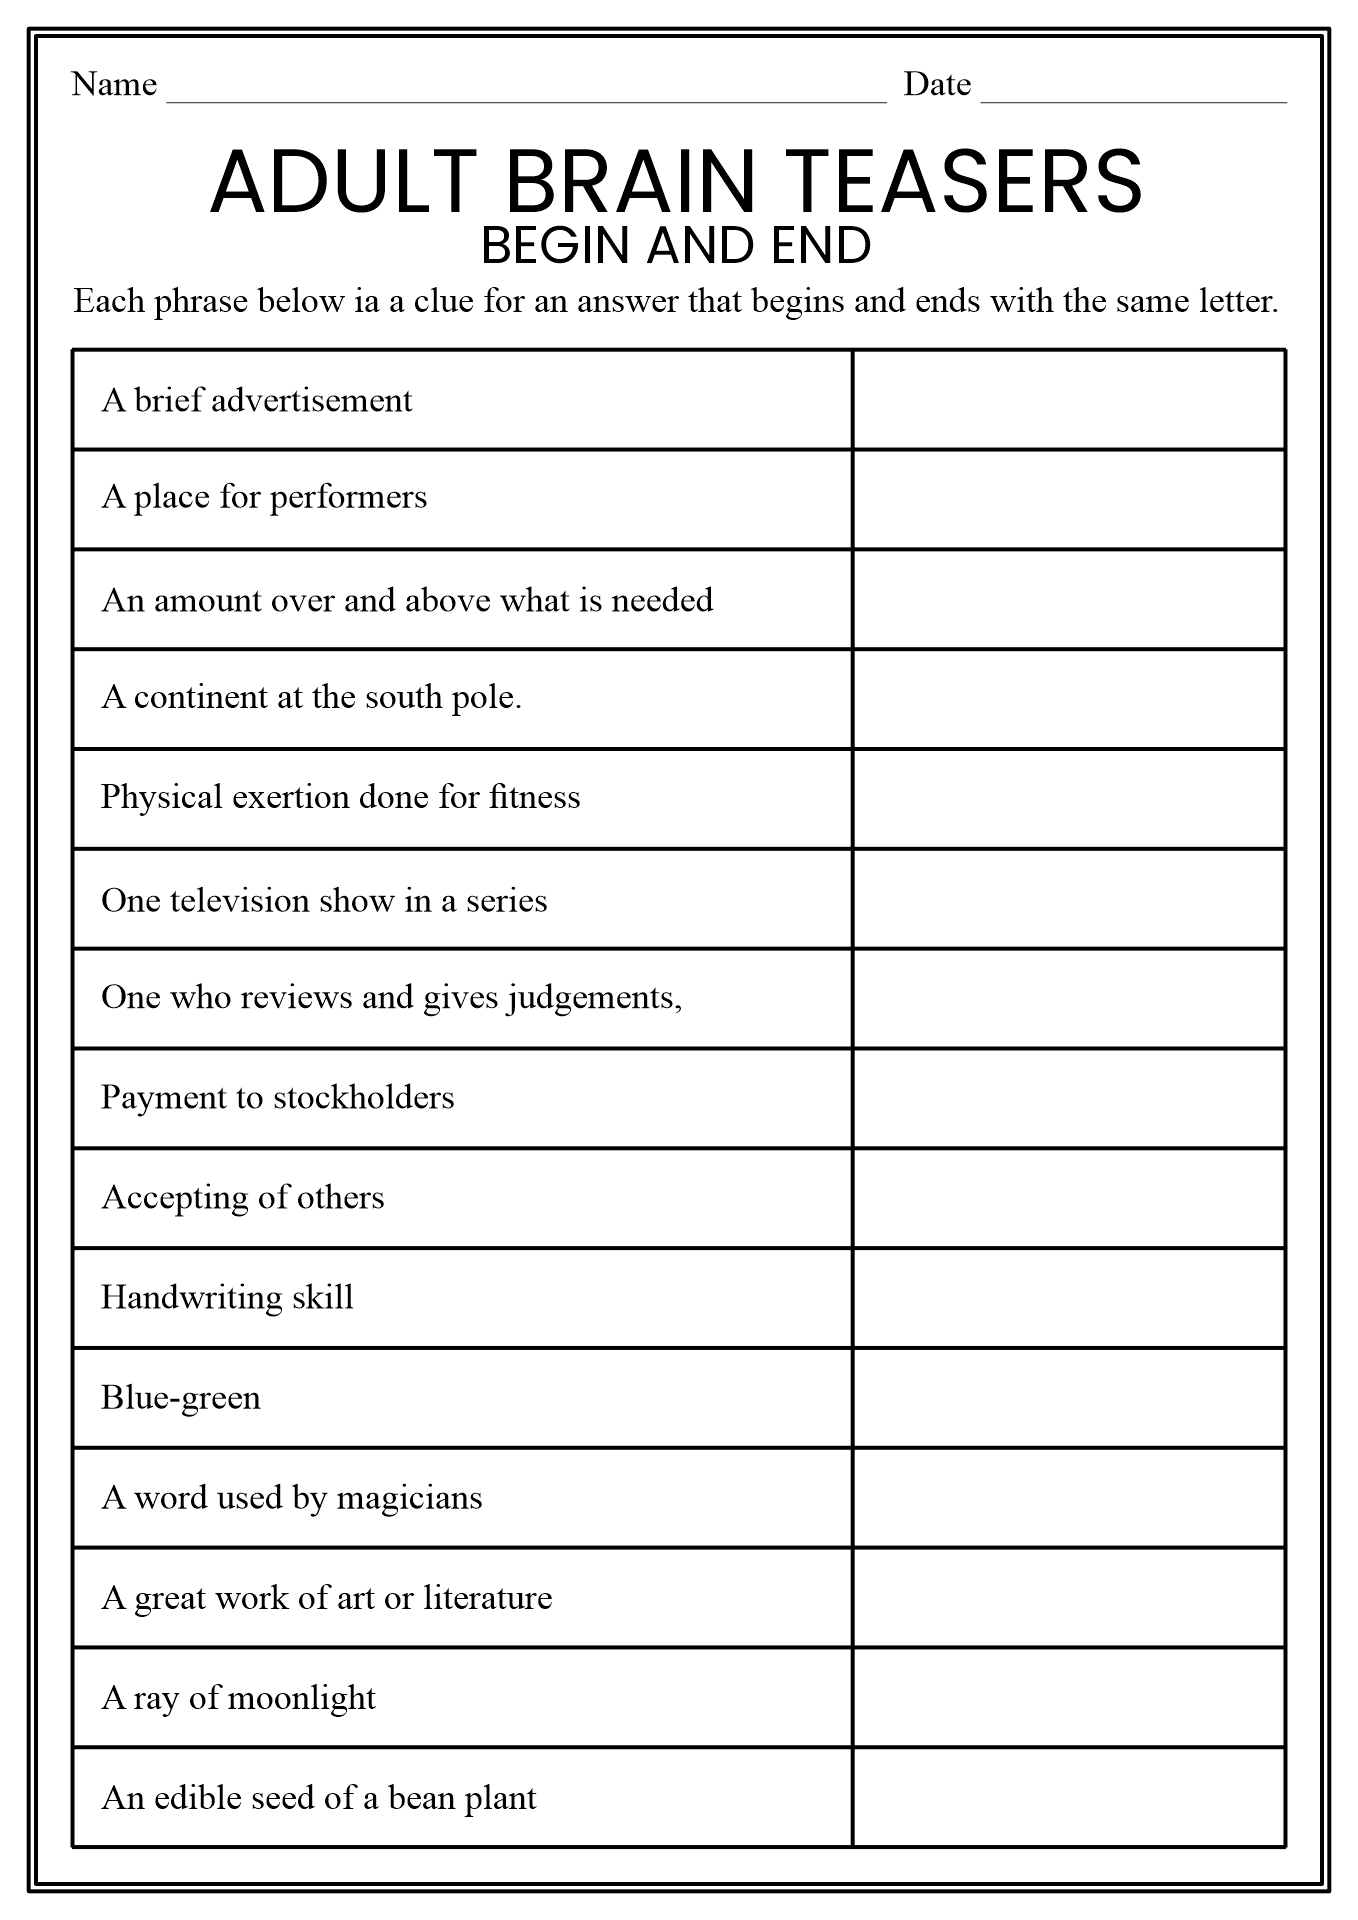 12-best-images-of-riddles-and-brain-teasers-worksheets-printable